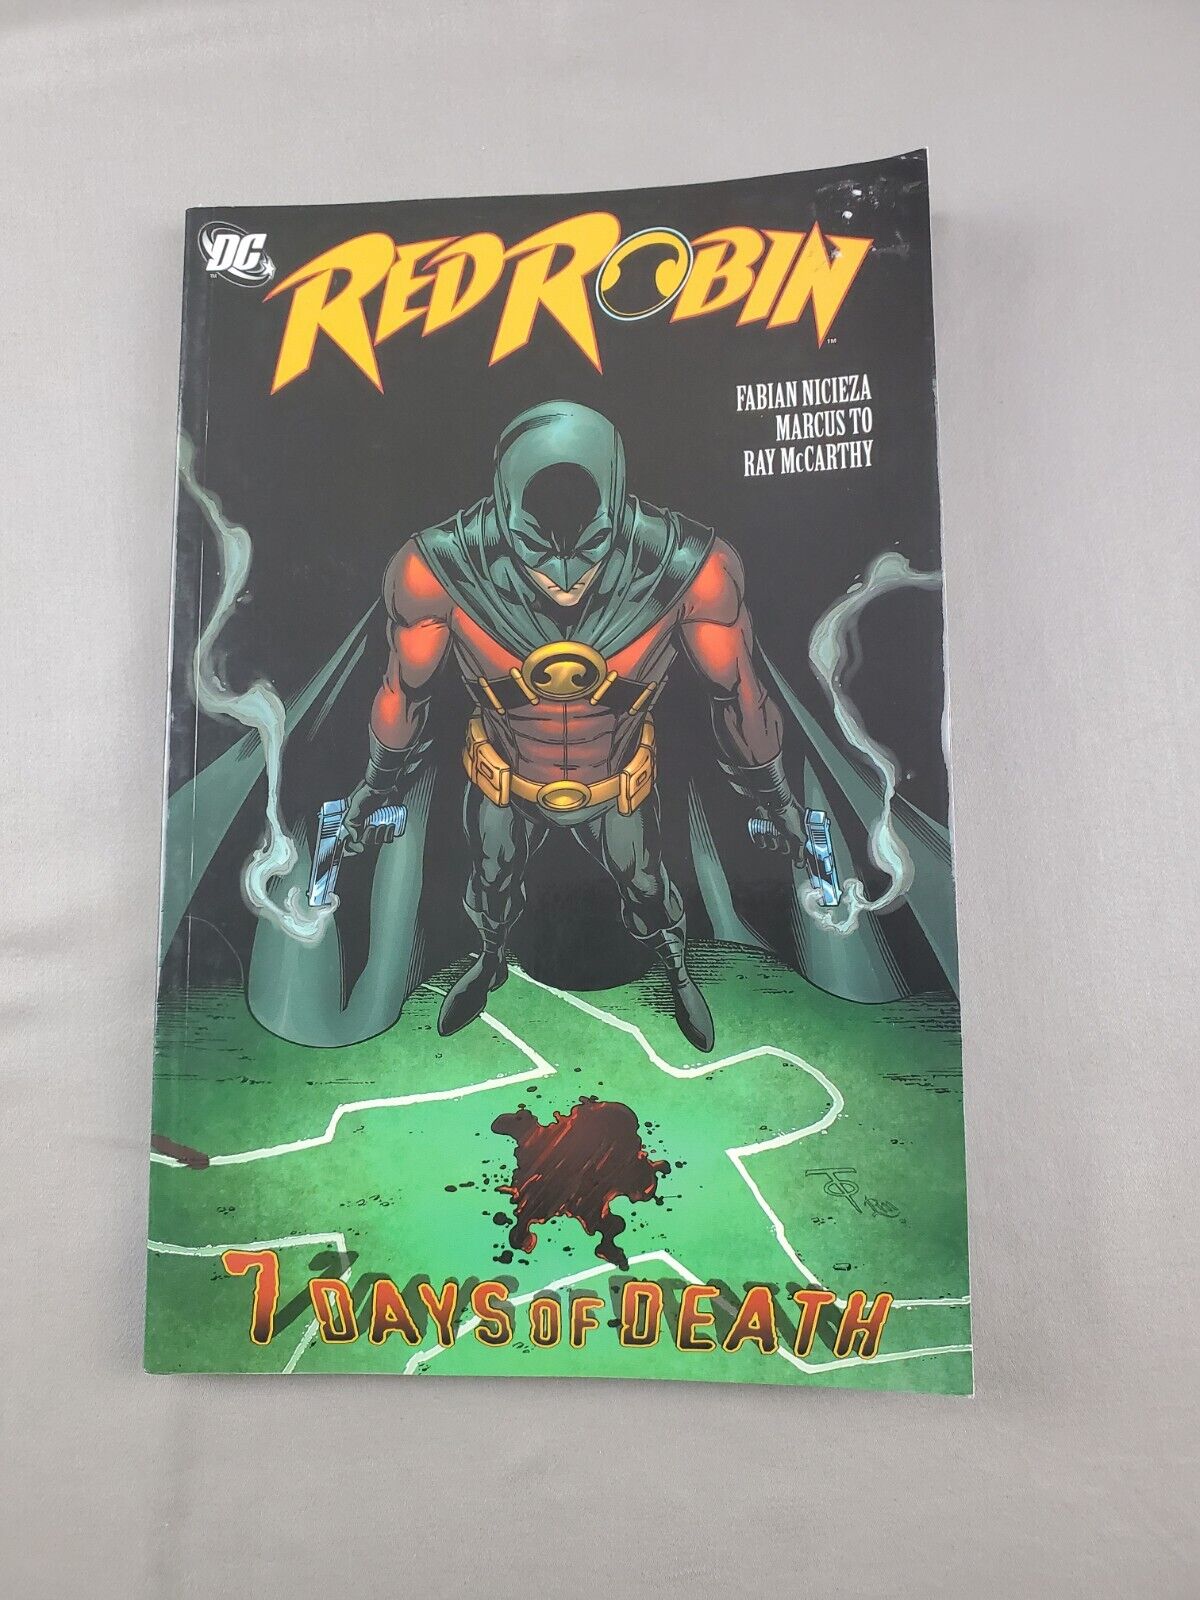 Red Robin 7 Seven Days of Death Trade Paperback ISBN 9781401233648